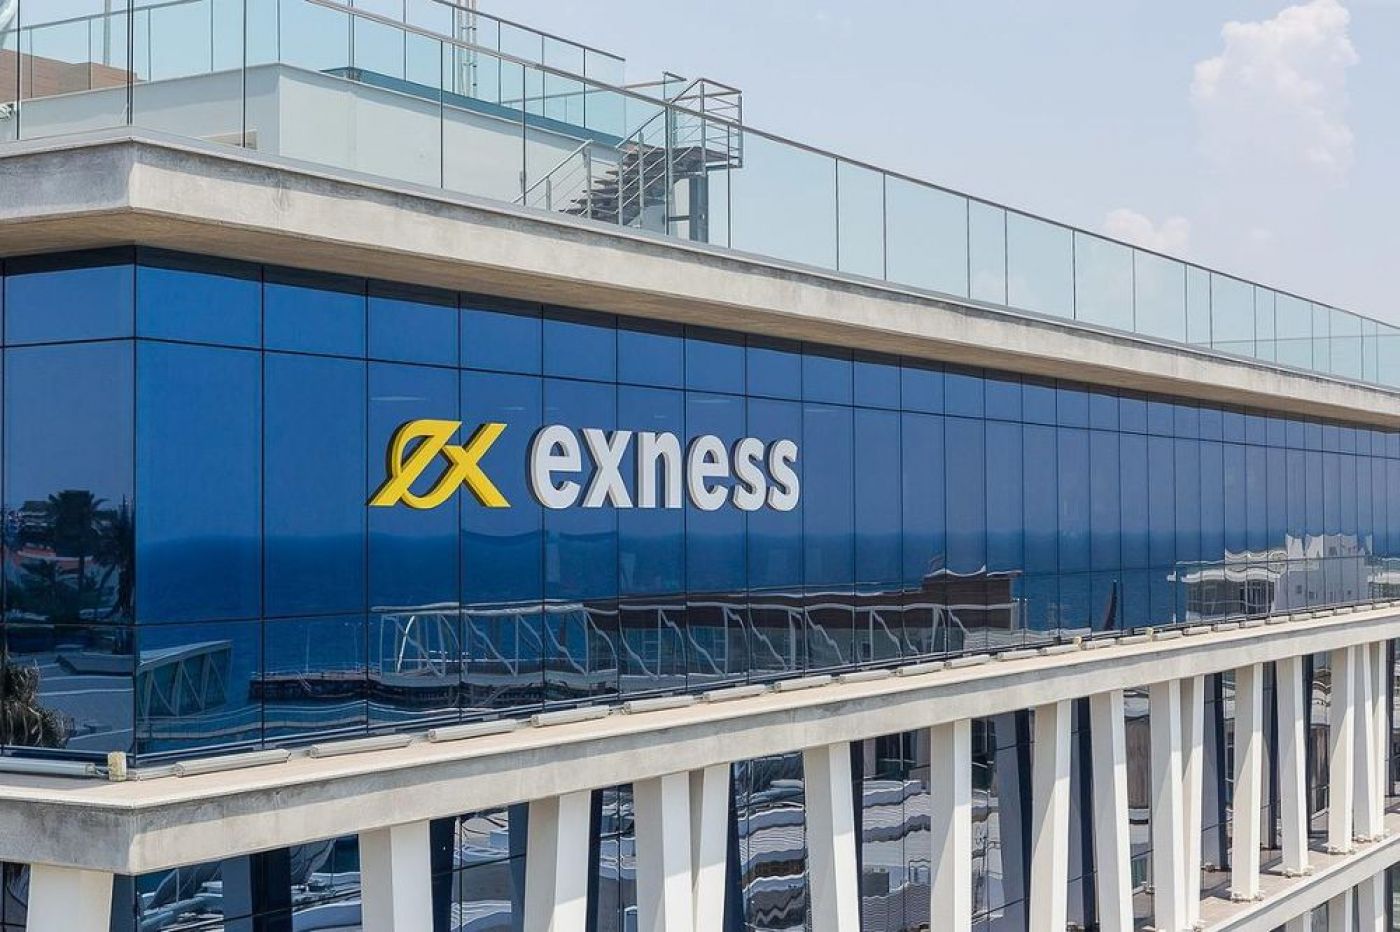 Exness sees record active traders despite February 9% dip in trading volumes